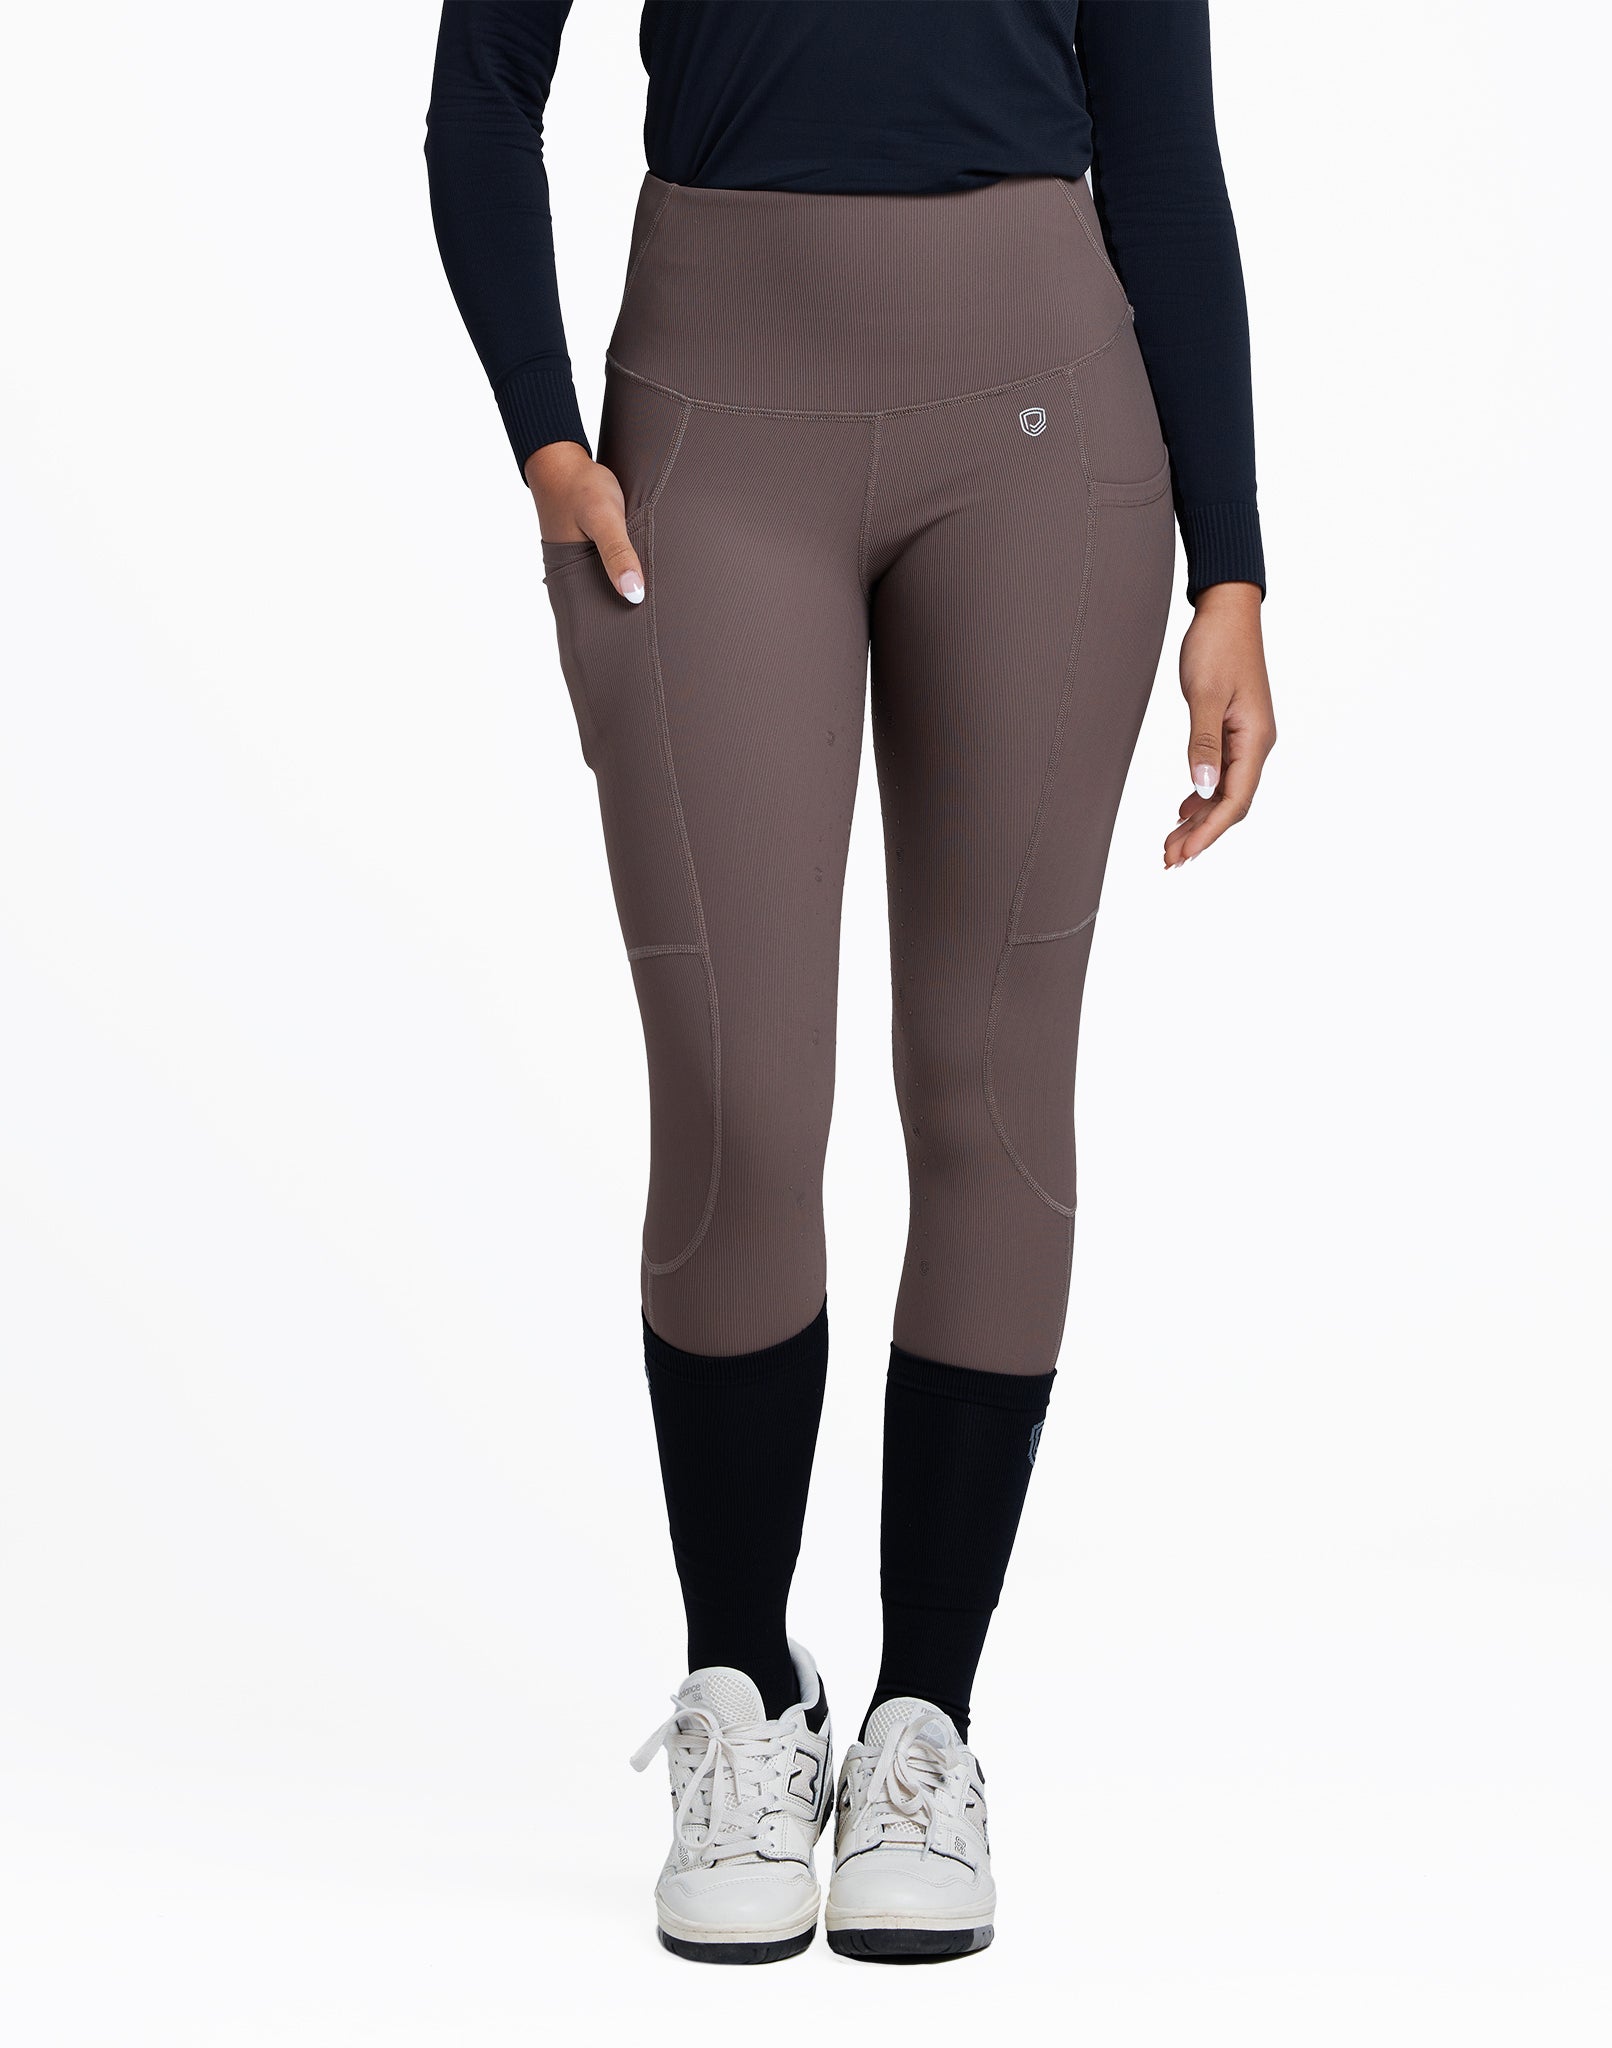 Dark Grey Riding Tights® / Leggings® With Full Seat and Deep Phone Pocket